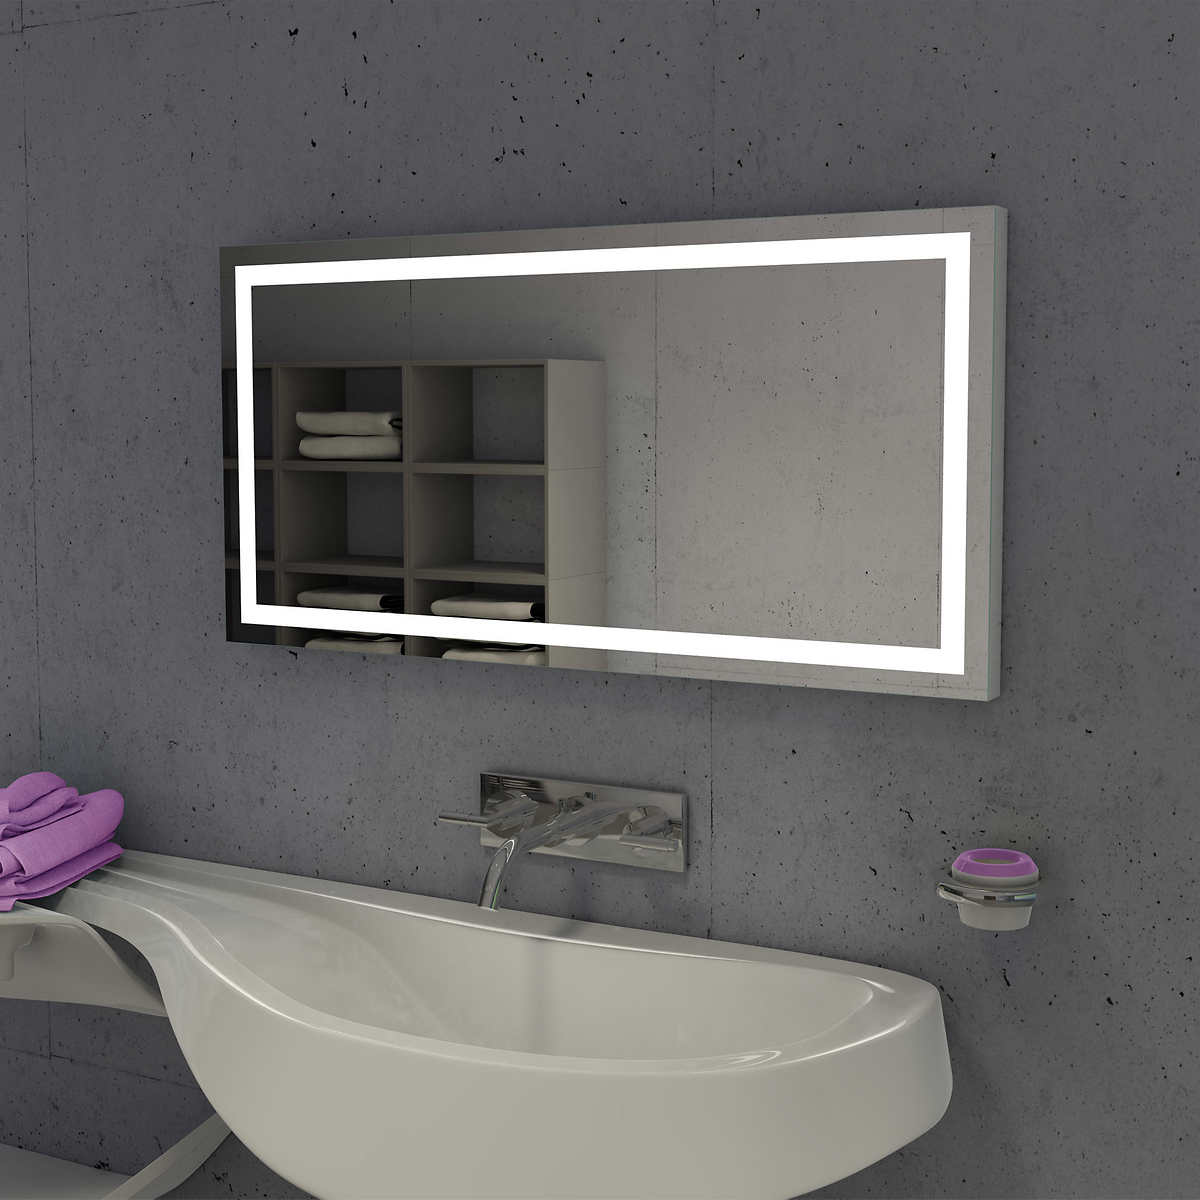 Suite Mirror Dimmable Led Illuminated, Sunter Led Vanity Mirror Costco Canada